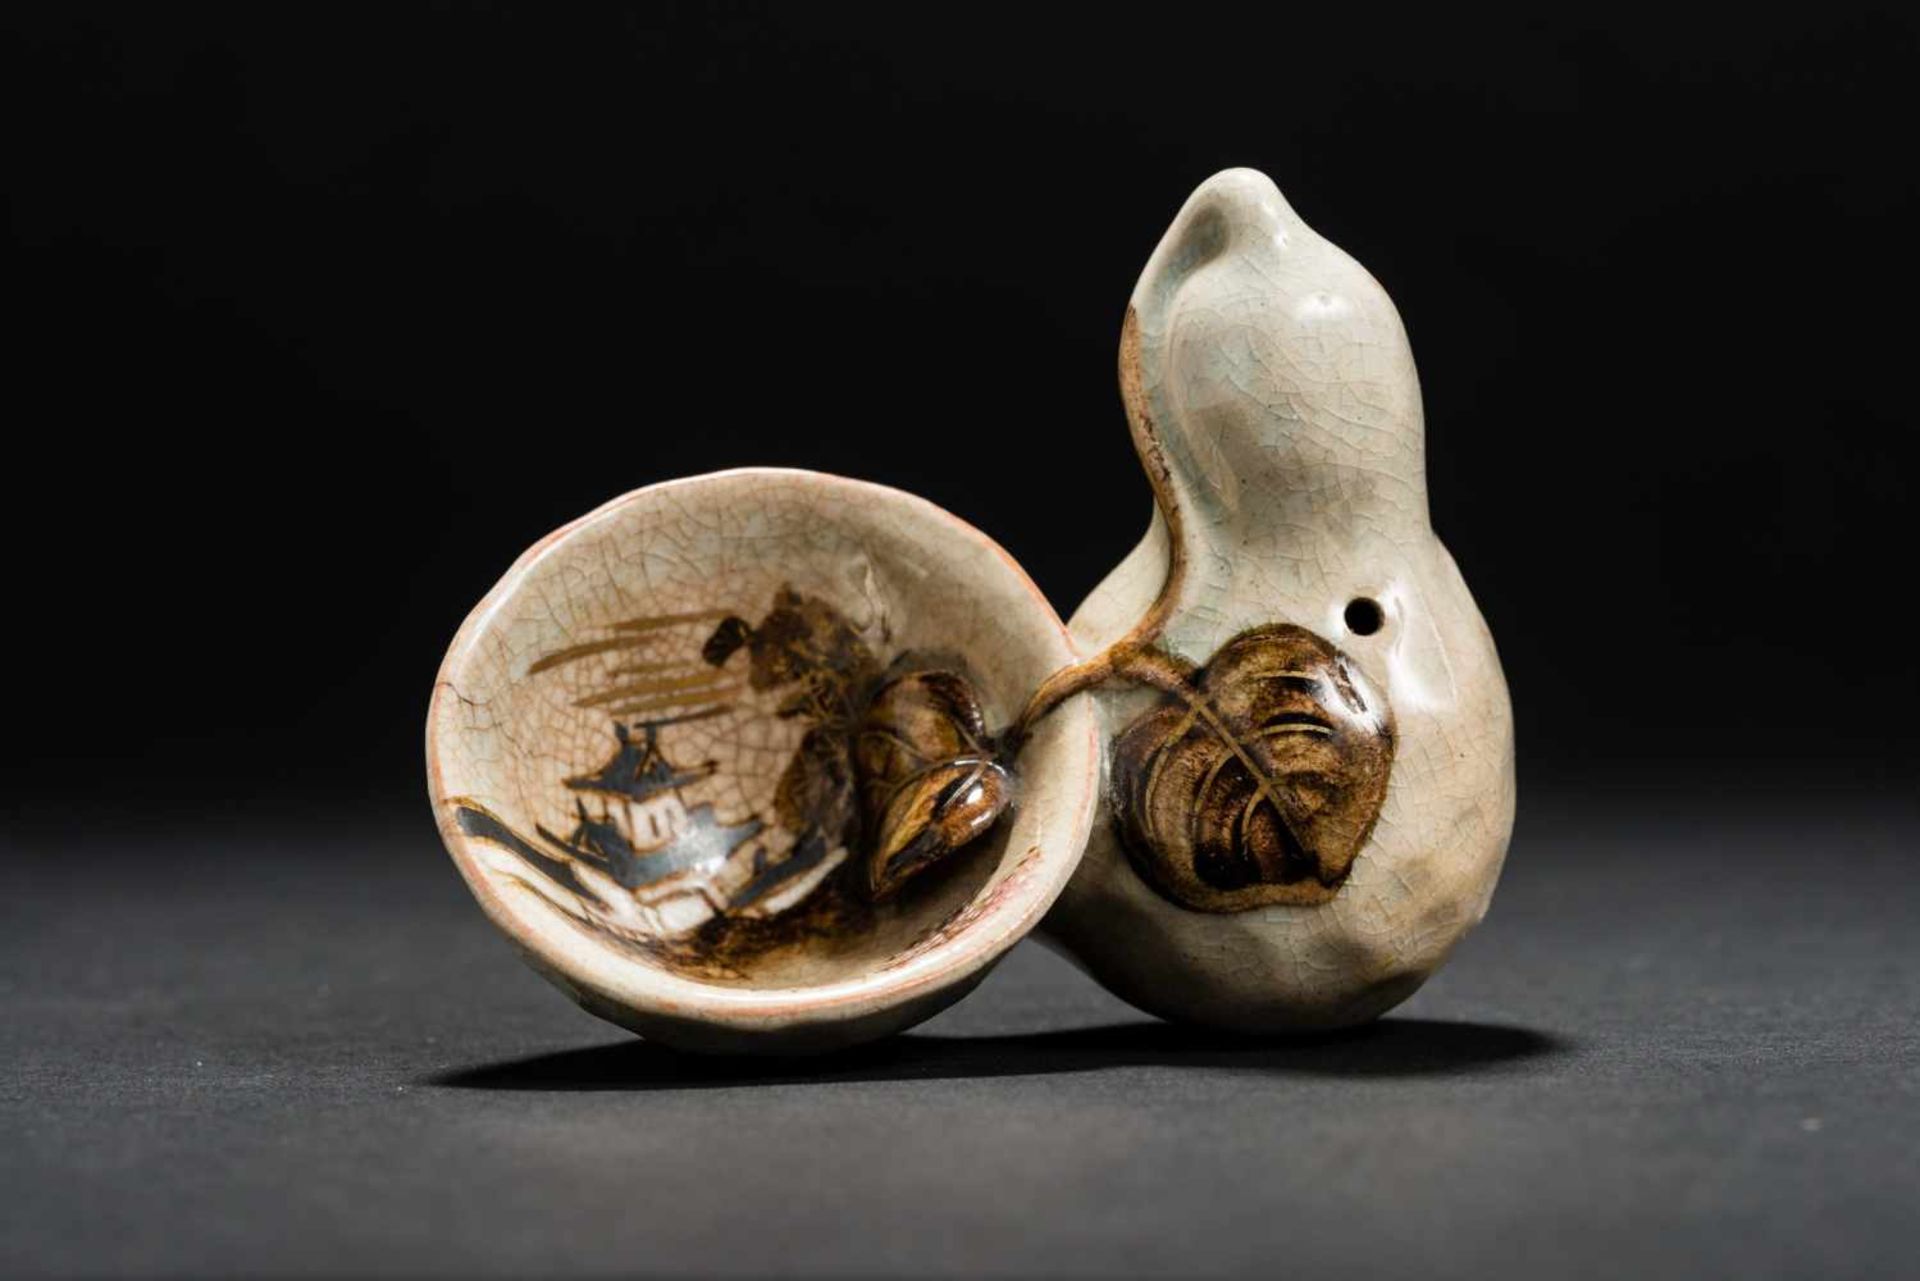 WATER DROPPER AND WATER BOWL Glazed stoneware. China, late Qing Dynasty to Republic A bottle